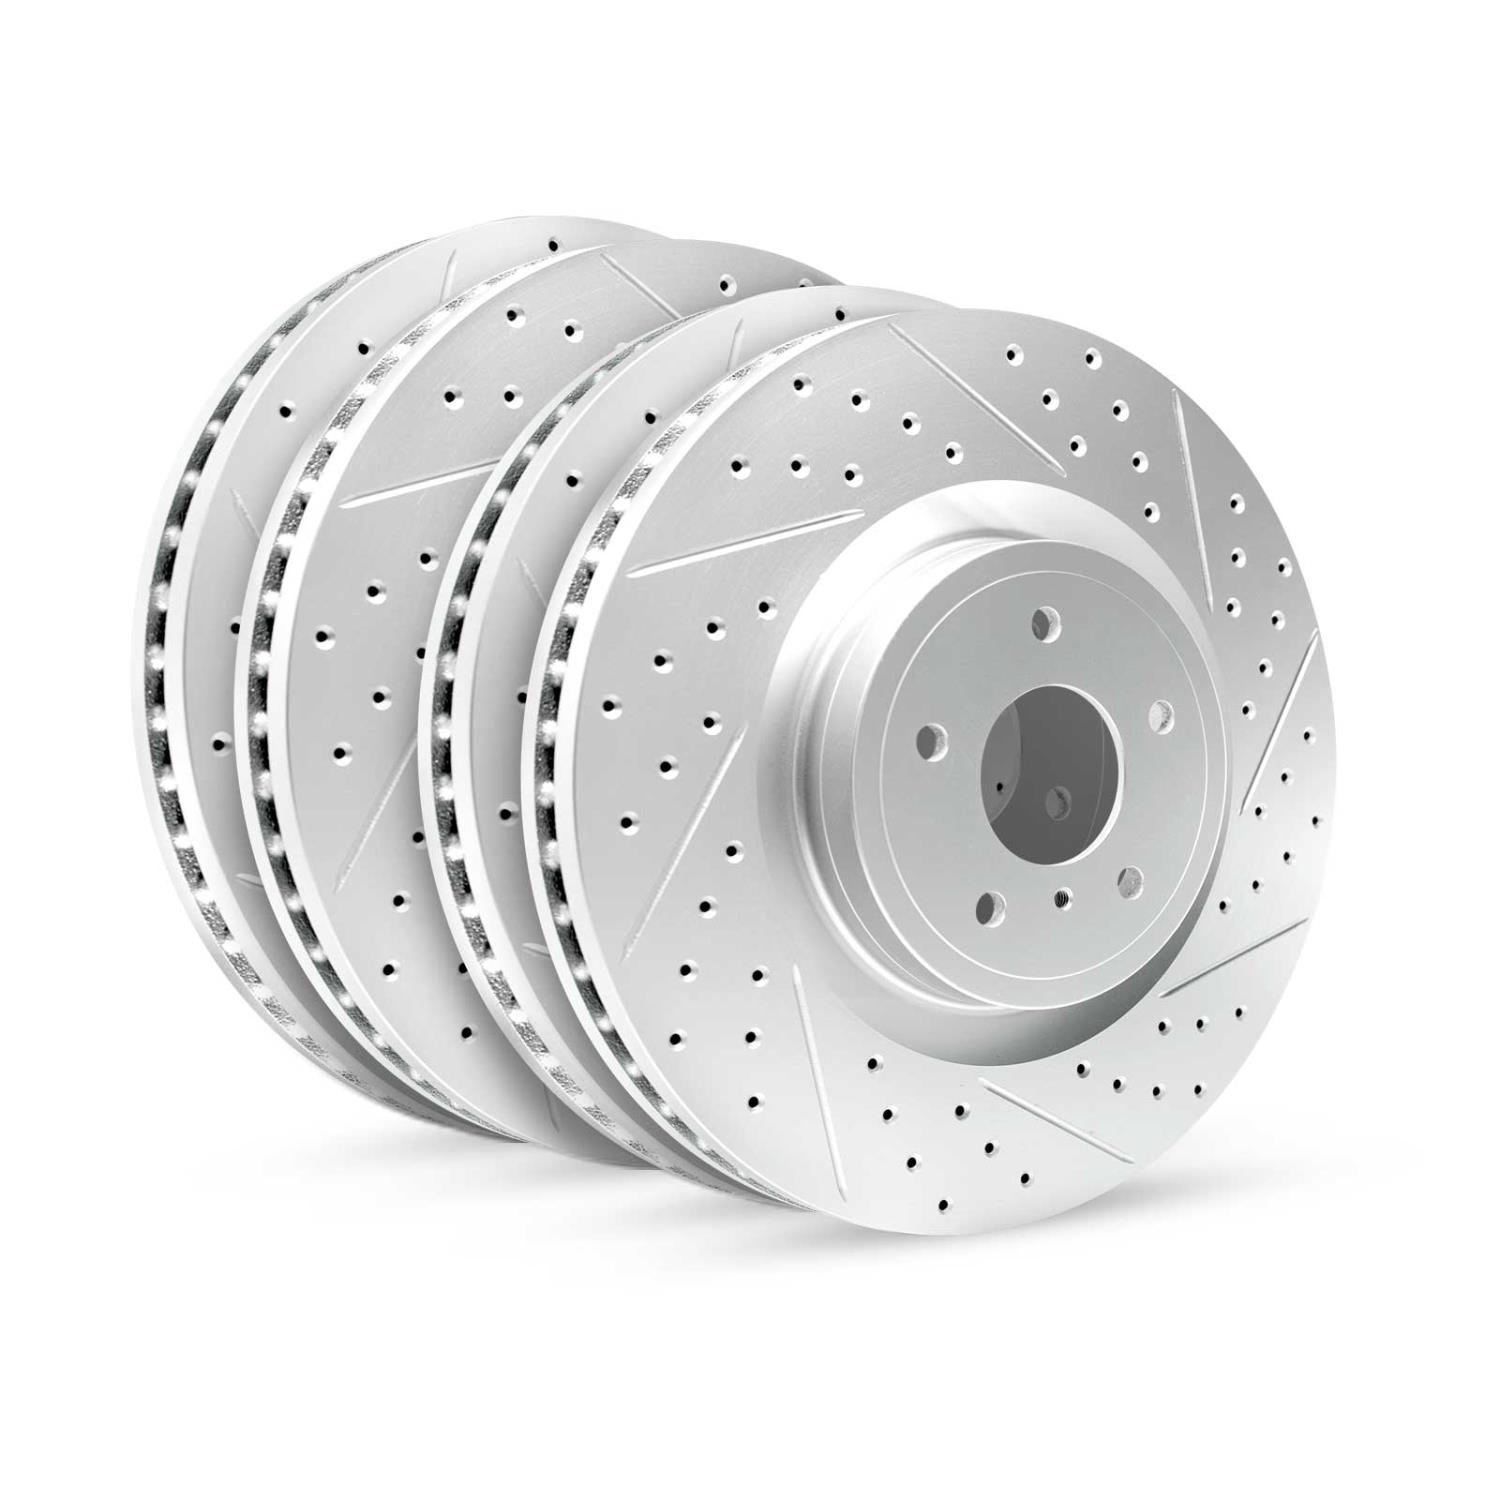 GEO-Carbon Drilled/Slotted Rotors, 2006-2010 Ford/Mazda,